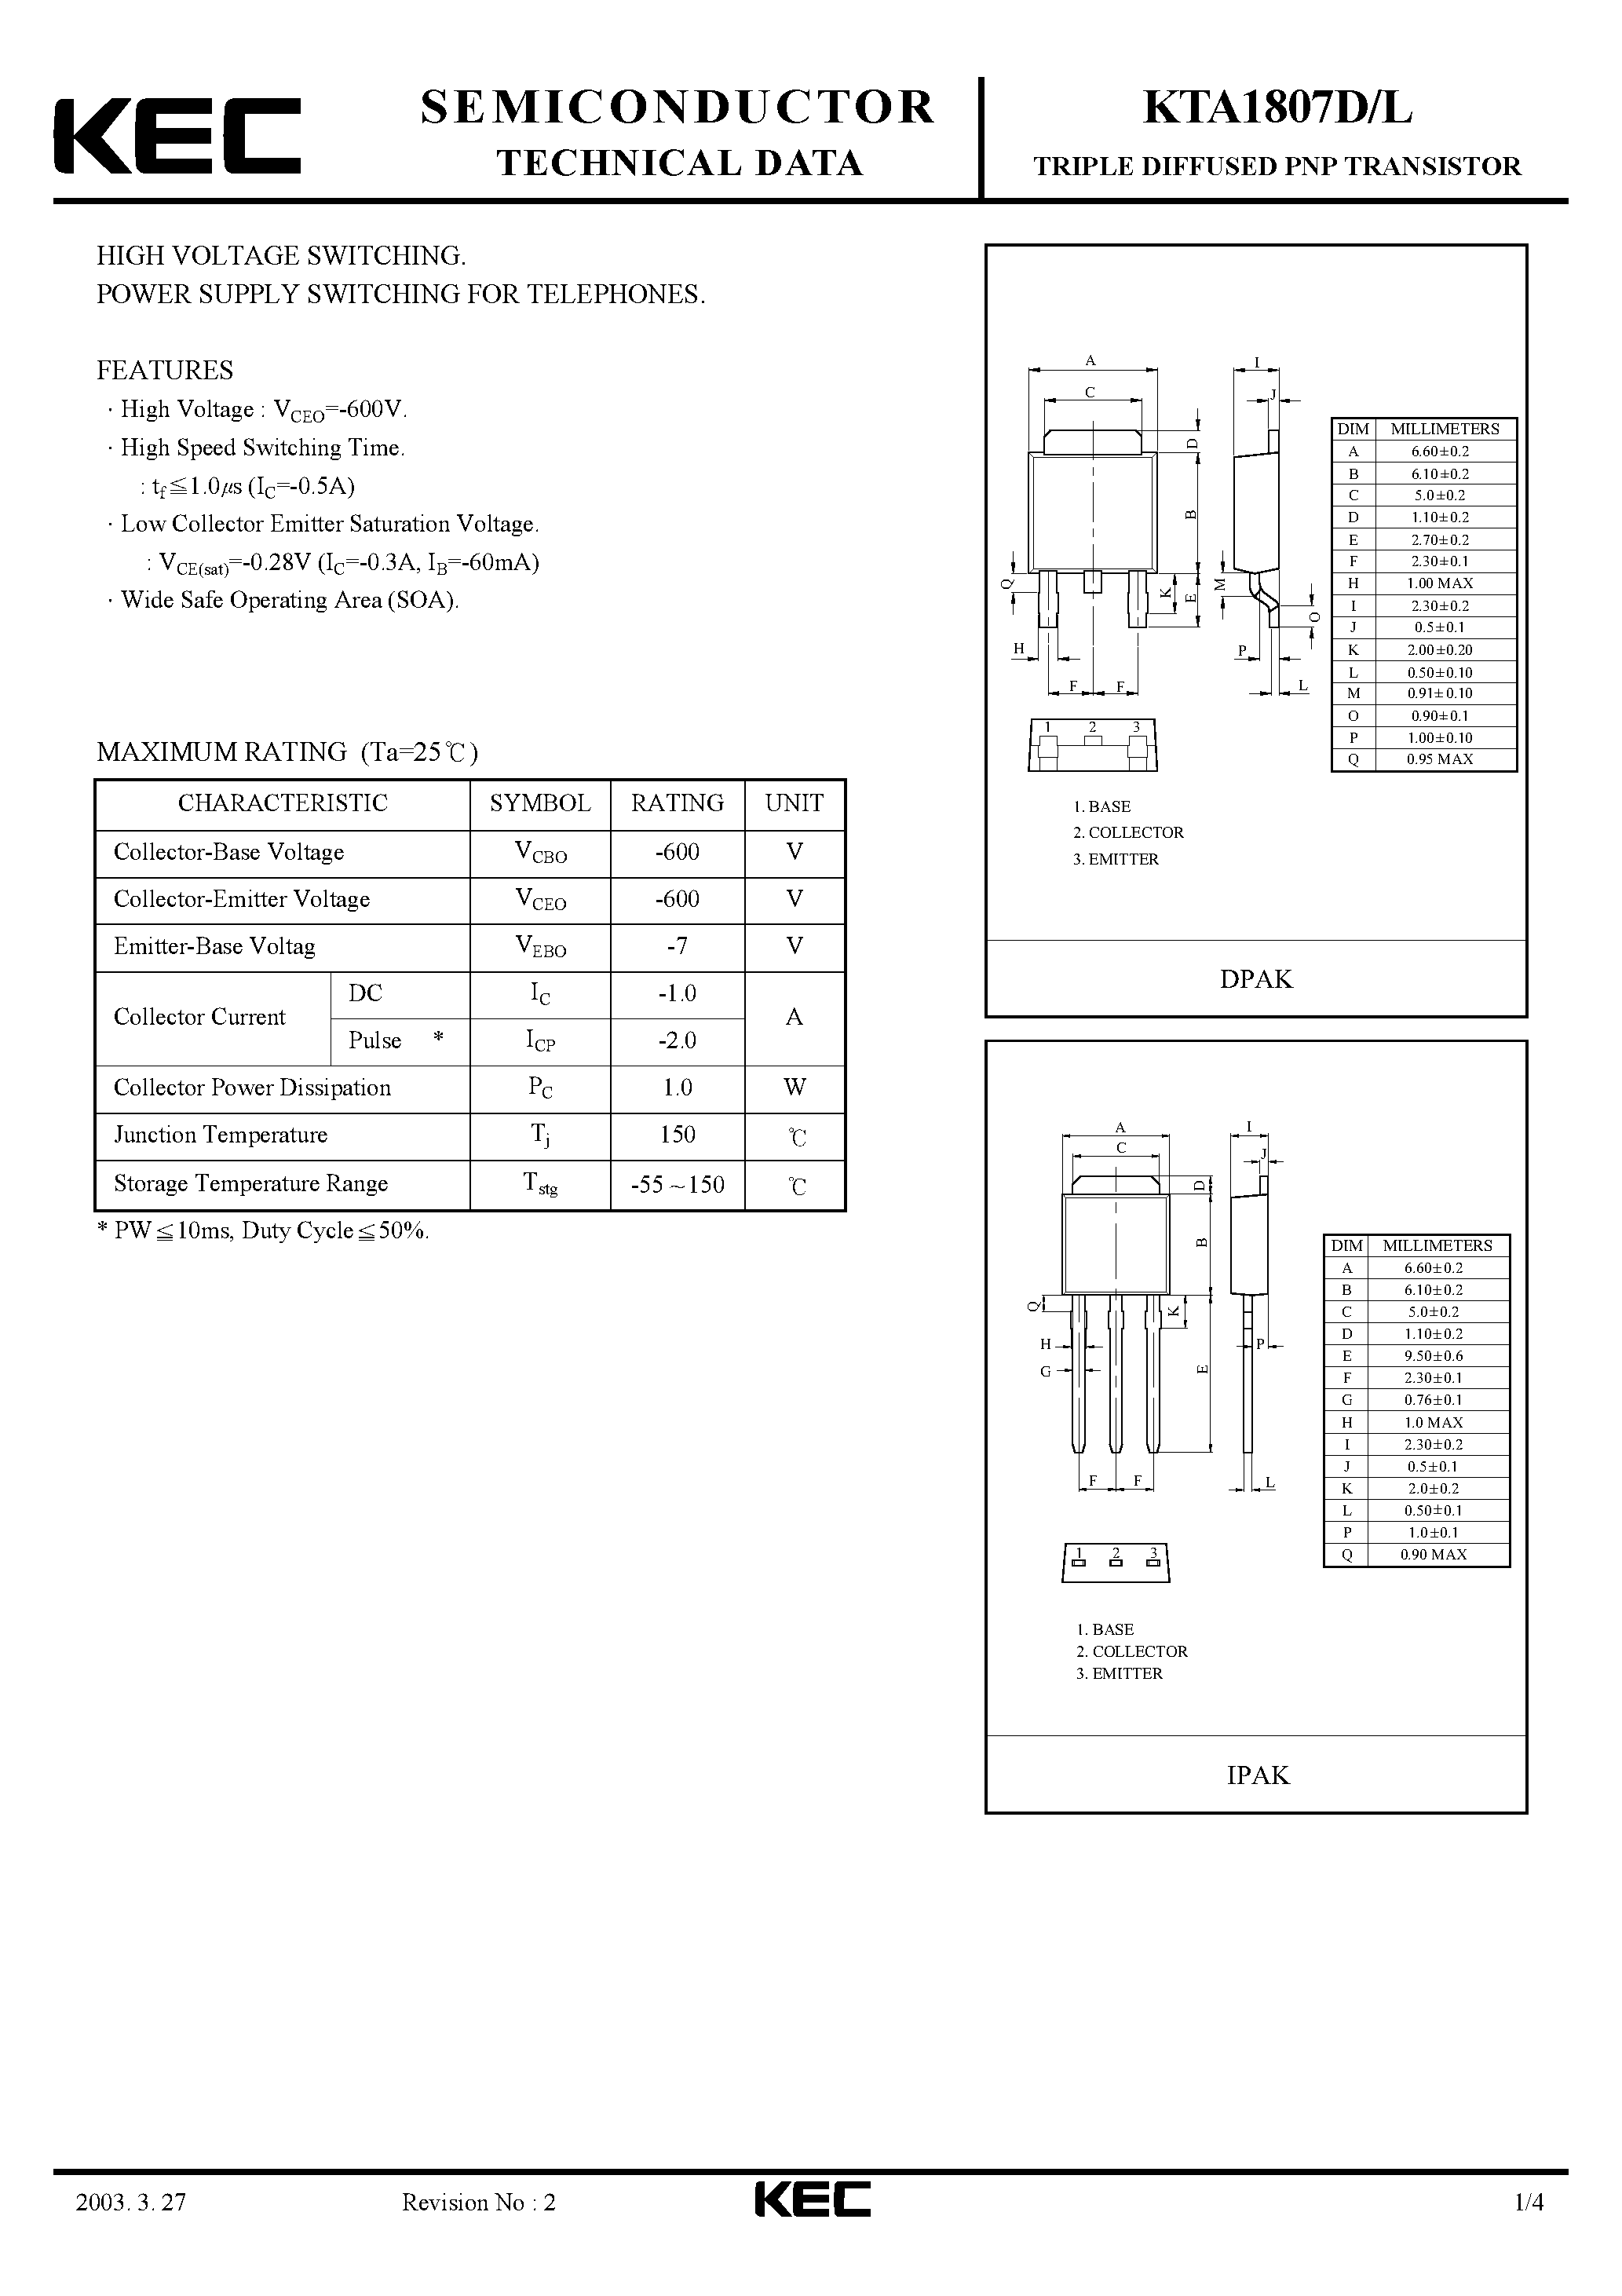 Даташит KTA1807D - TRIPLE DIFFUSED PNP TRANSISTOR(HIGH VOLTAGE SWITCHING POWER SUPPLY SWITCHING FOR TELEPHONES) страница 1